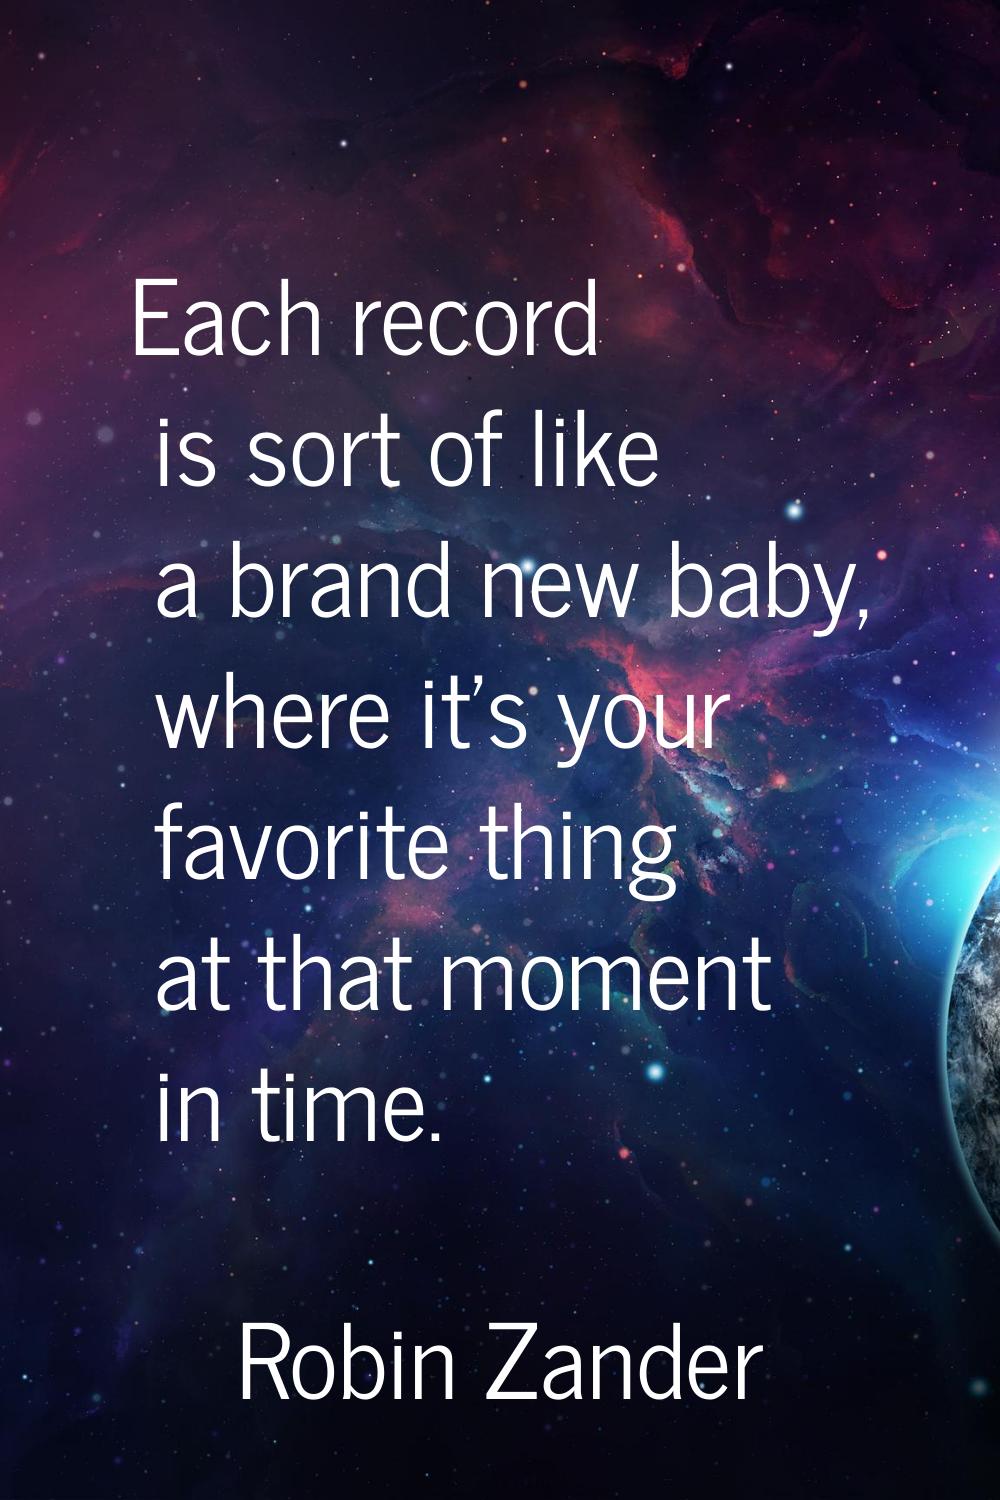 Each record is sort of like a brand new baby, where it's your favorite thing at that moment in time